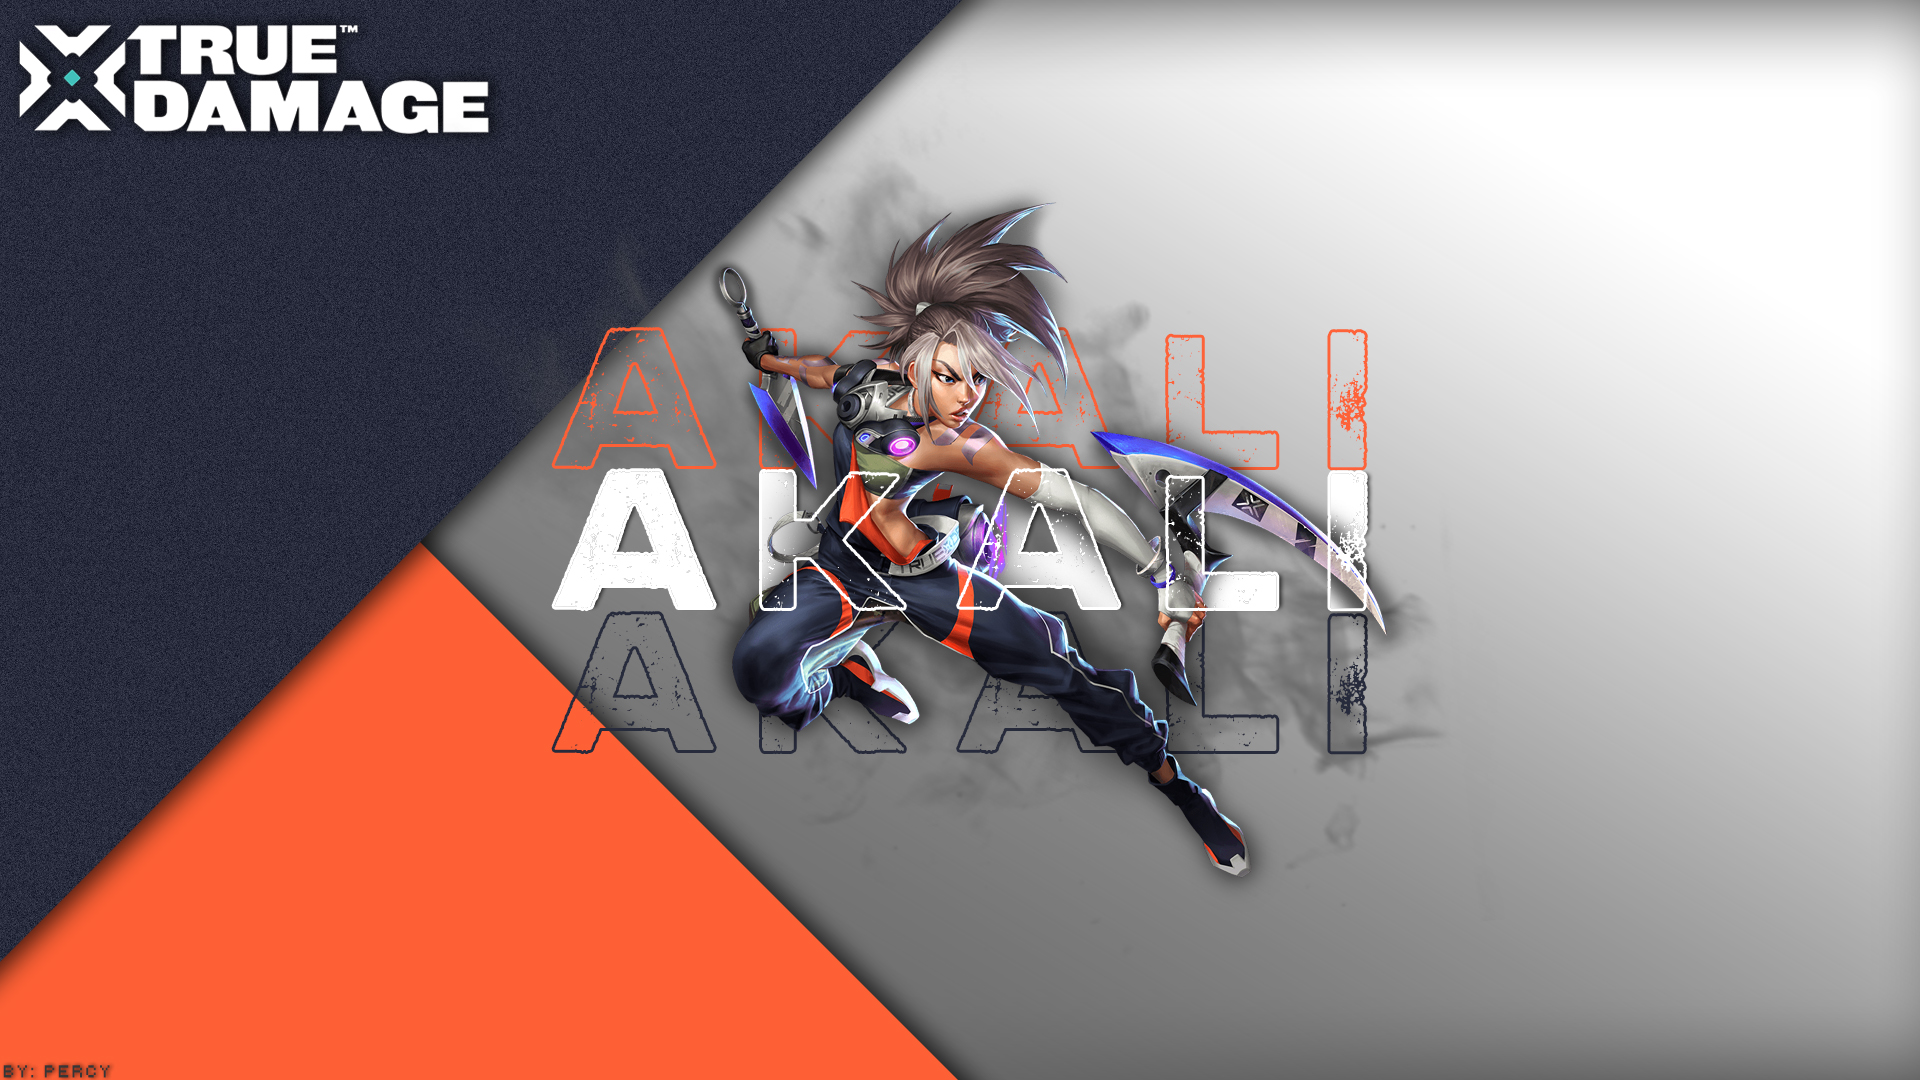 General 1920x1080 True Damage League of Legends Akali (League of Legends) video game characters